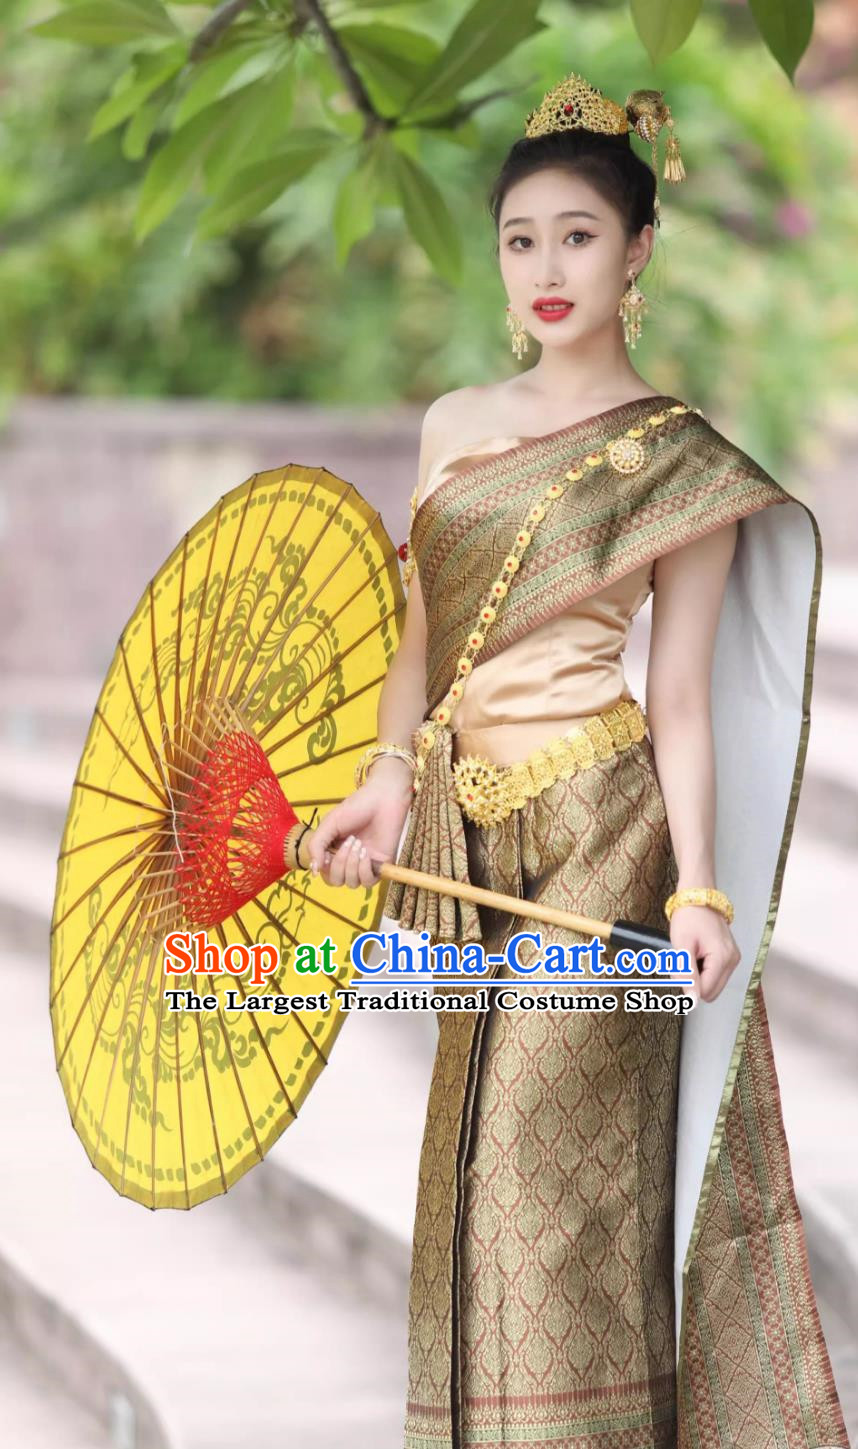 Thai Traditional Clothing Women Set Off Shoulder Thailand Daily Costume Welcome Work Uniform